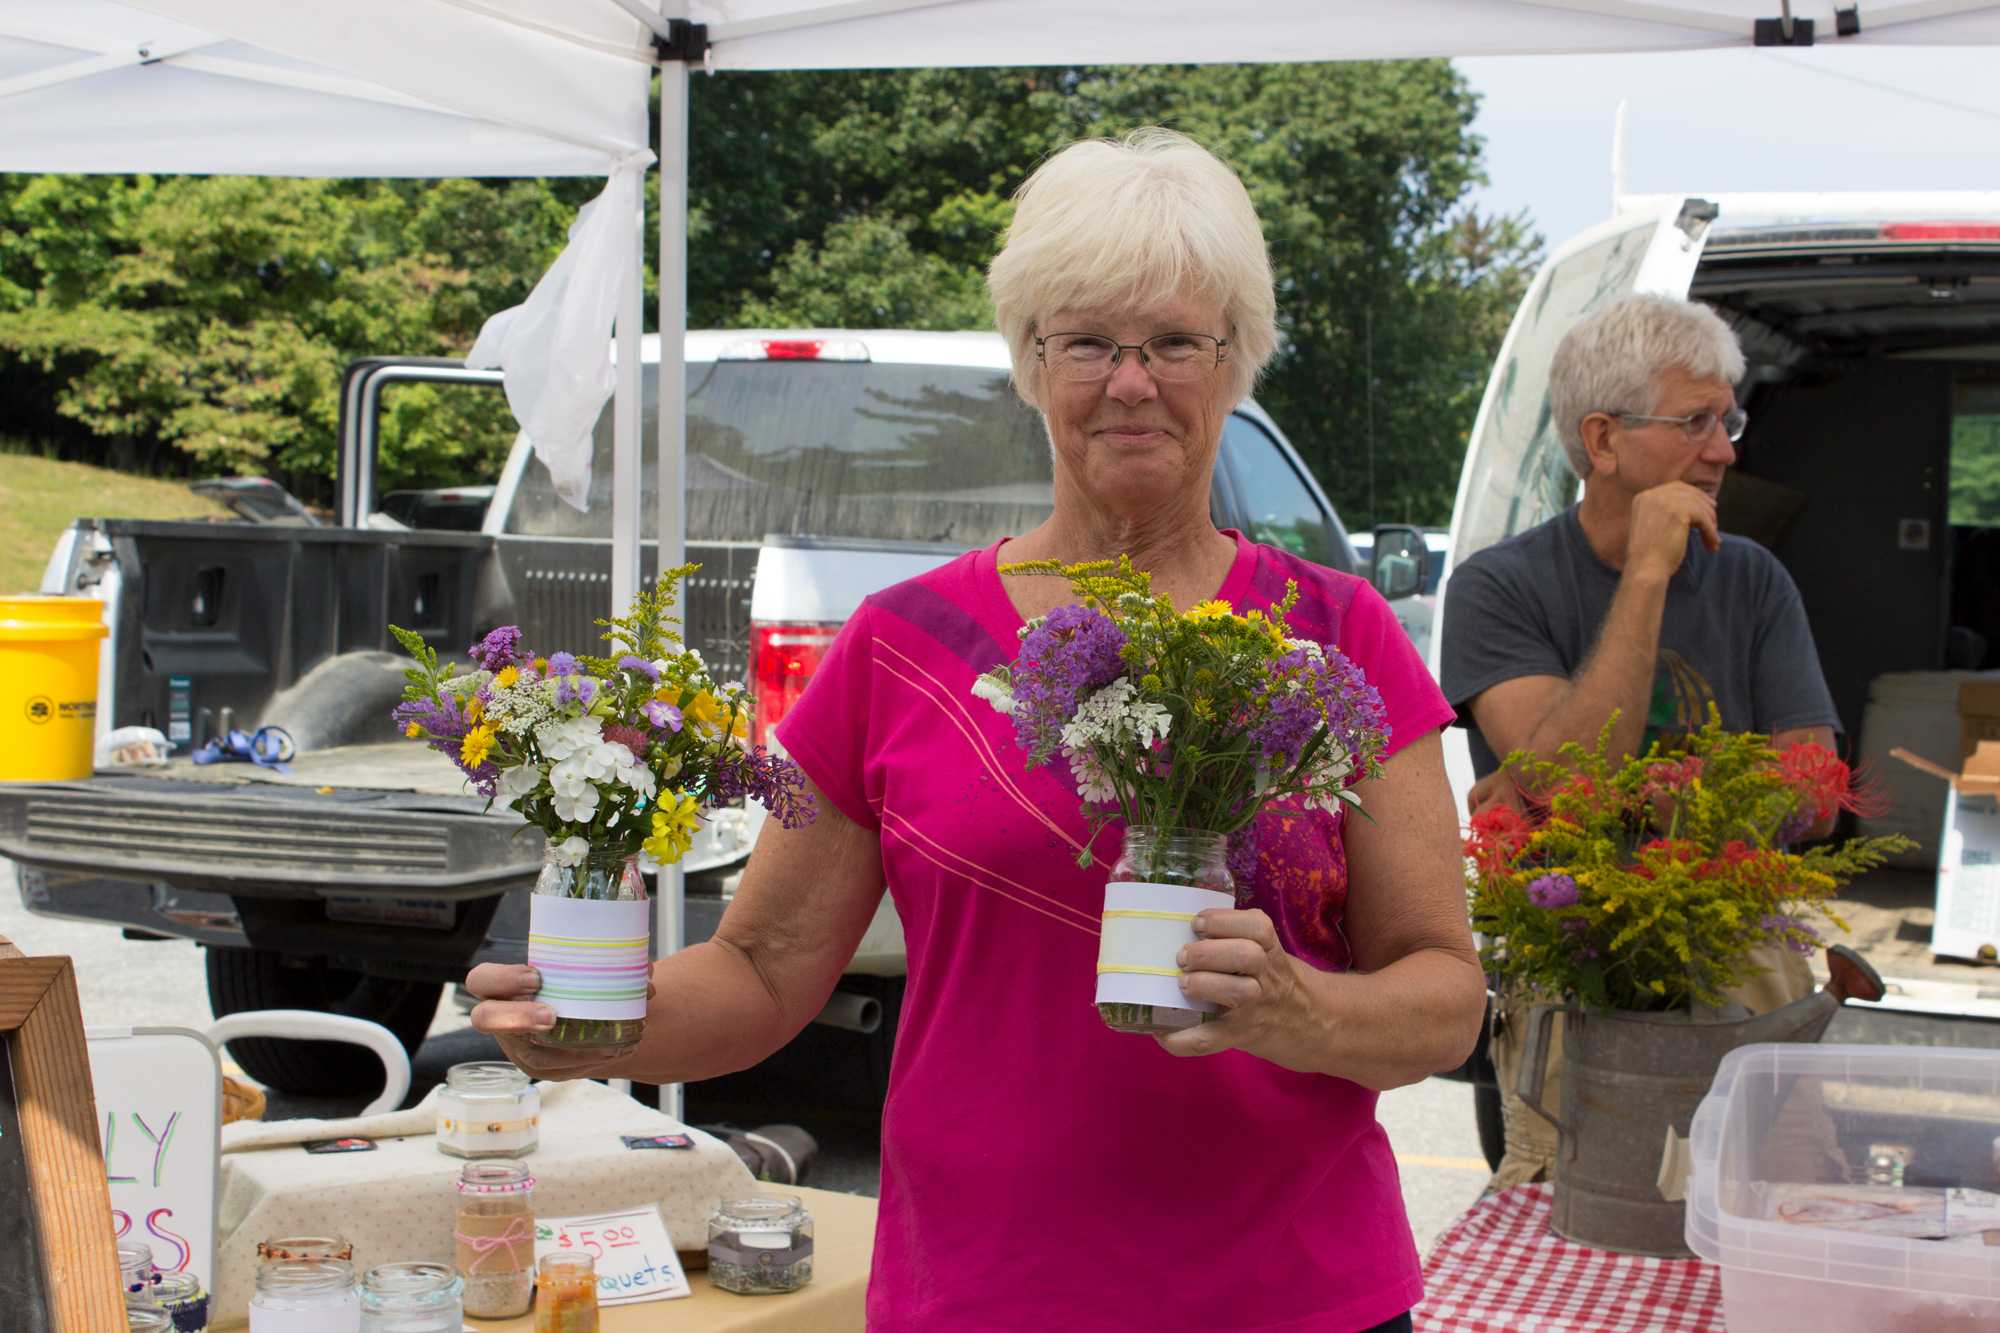 Lori Bryk, mother of Cory Bryk who started New Life Farm in Lenoir, NC helps her son and his family during the Farmers Market. Bryk passes out a bouquet of flowers to a random person each Saturday.